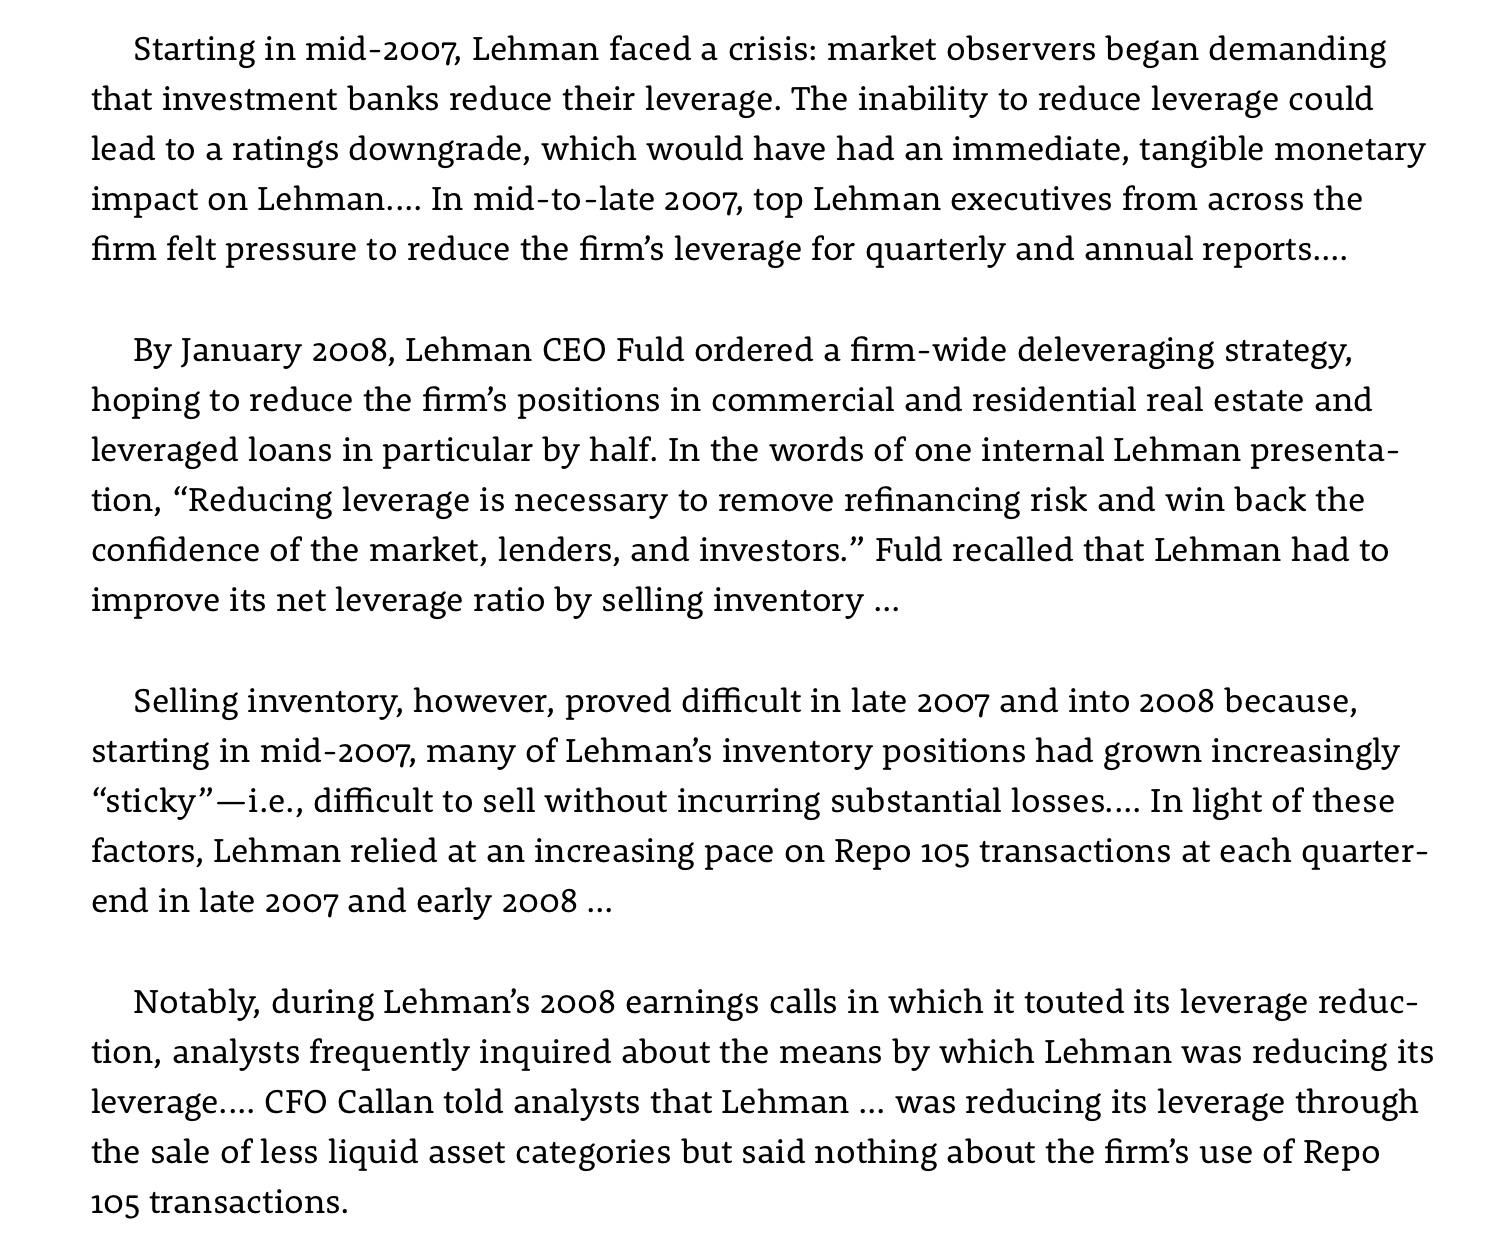 Starting in mid-2007, Lehman faced a crisis: market observers began demanding that investment banks reduce